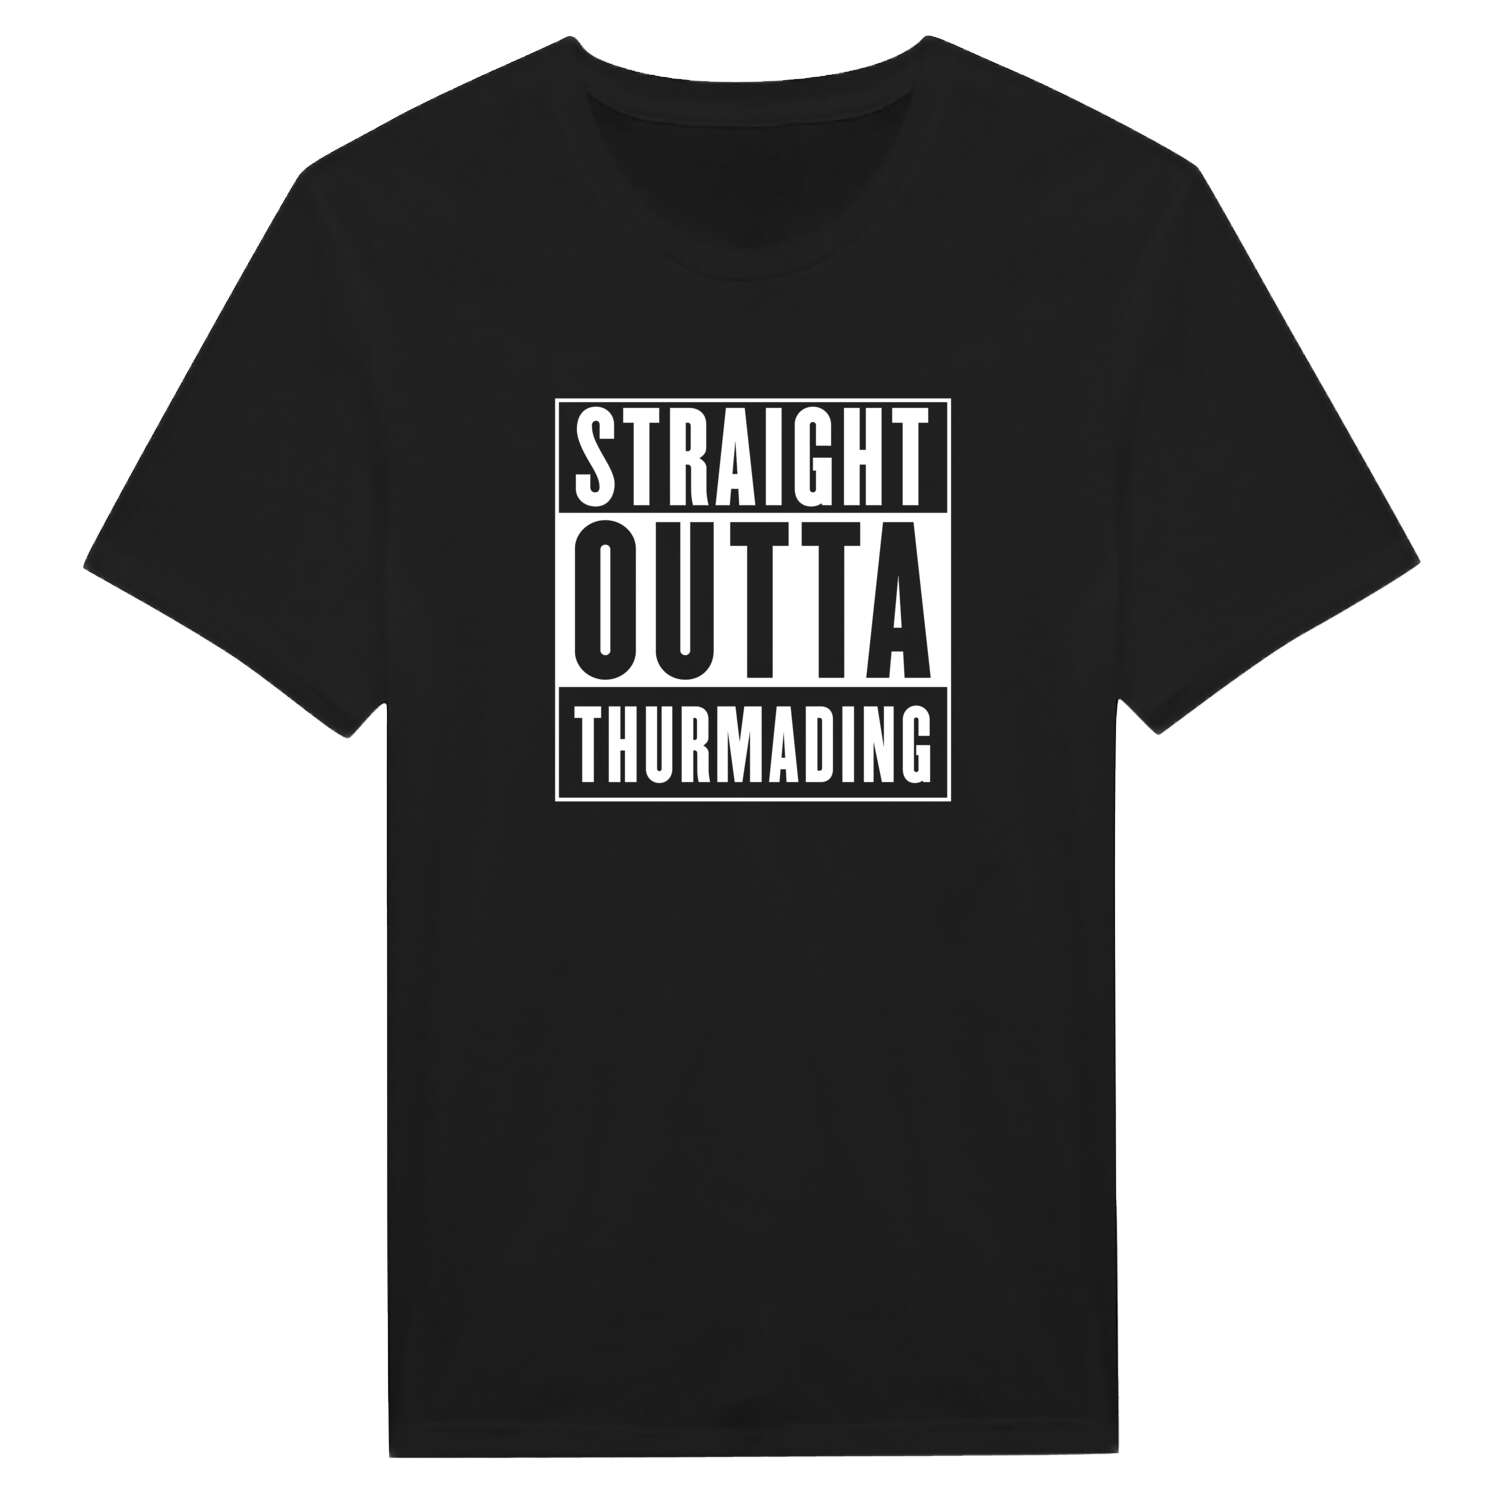 Thurmading T-Shirt »Straight Outta«